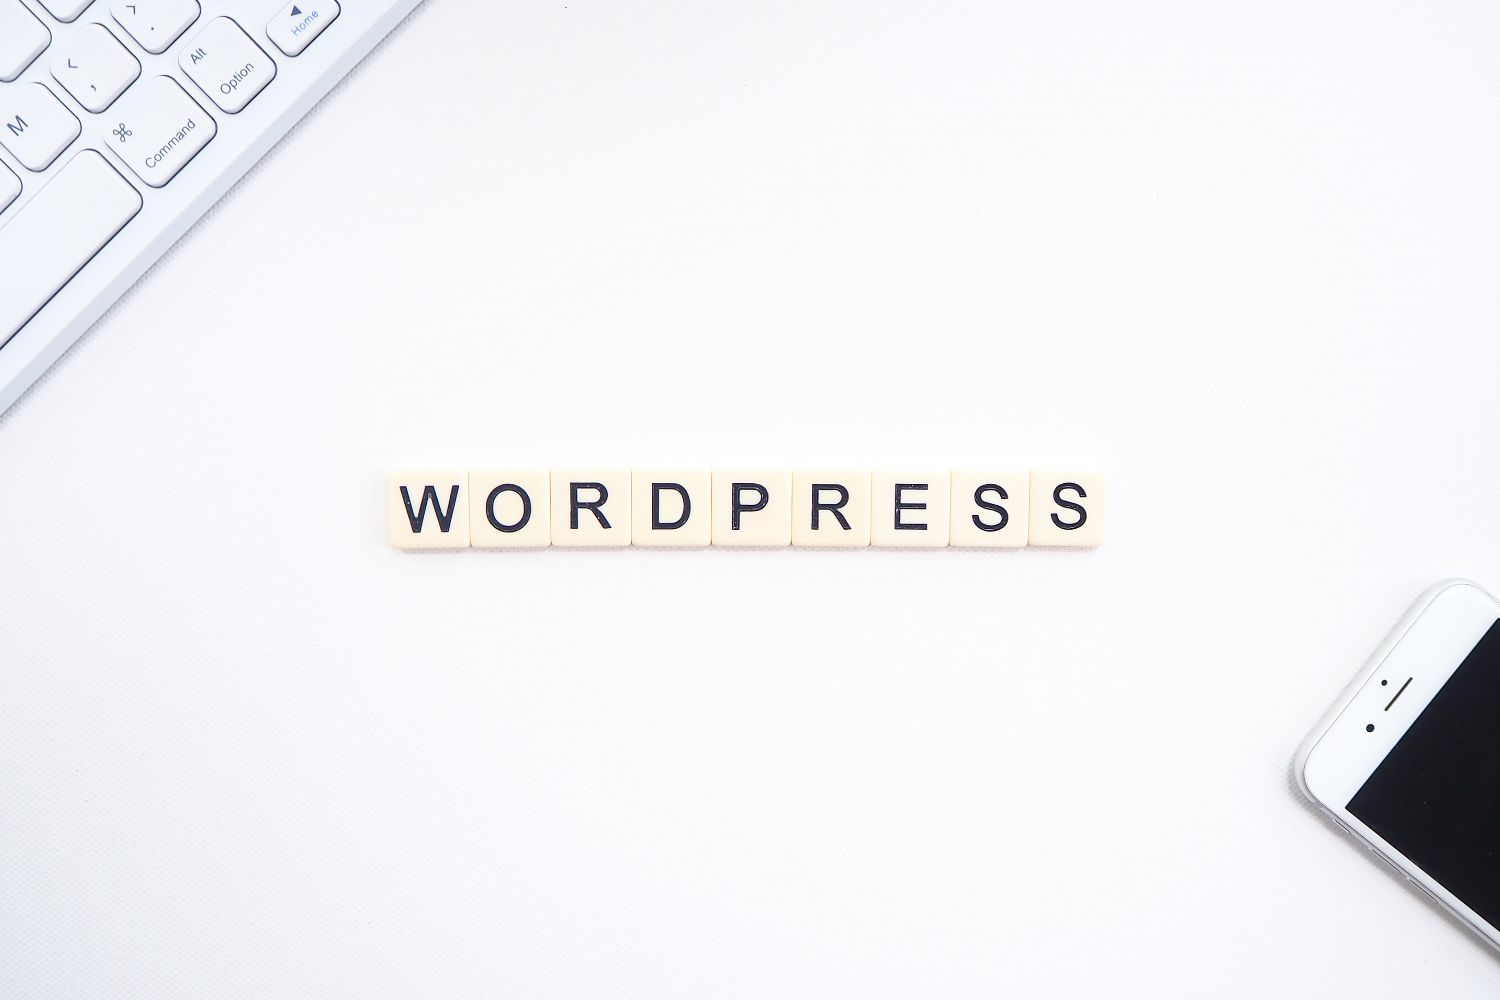 WordPress Website Tips To Have It Stunning Fast In 2022